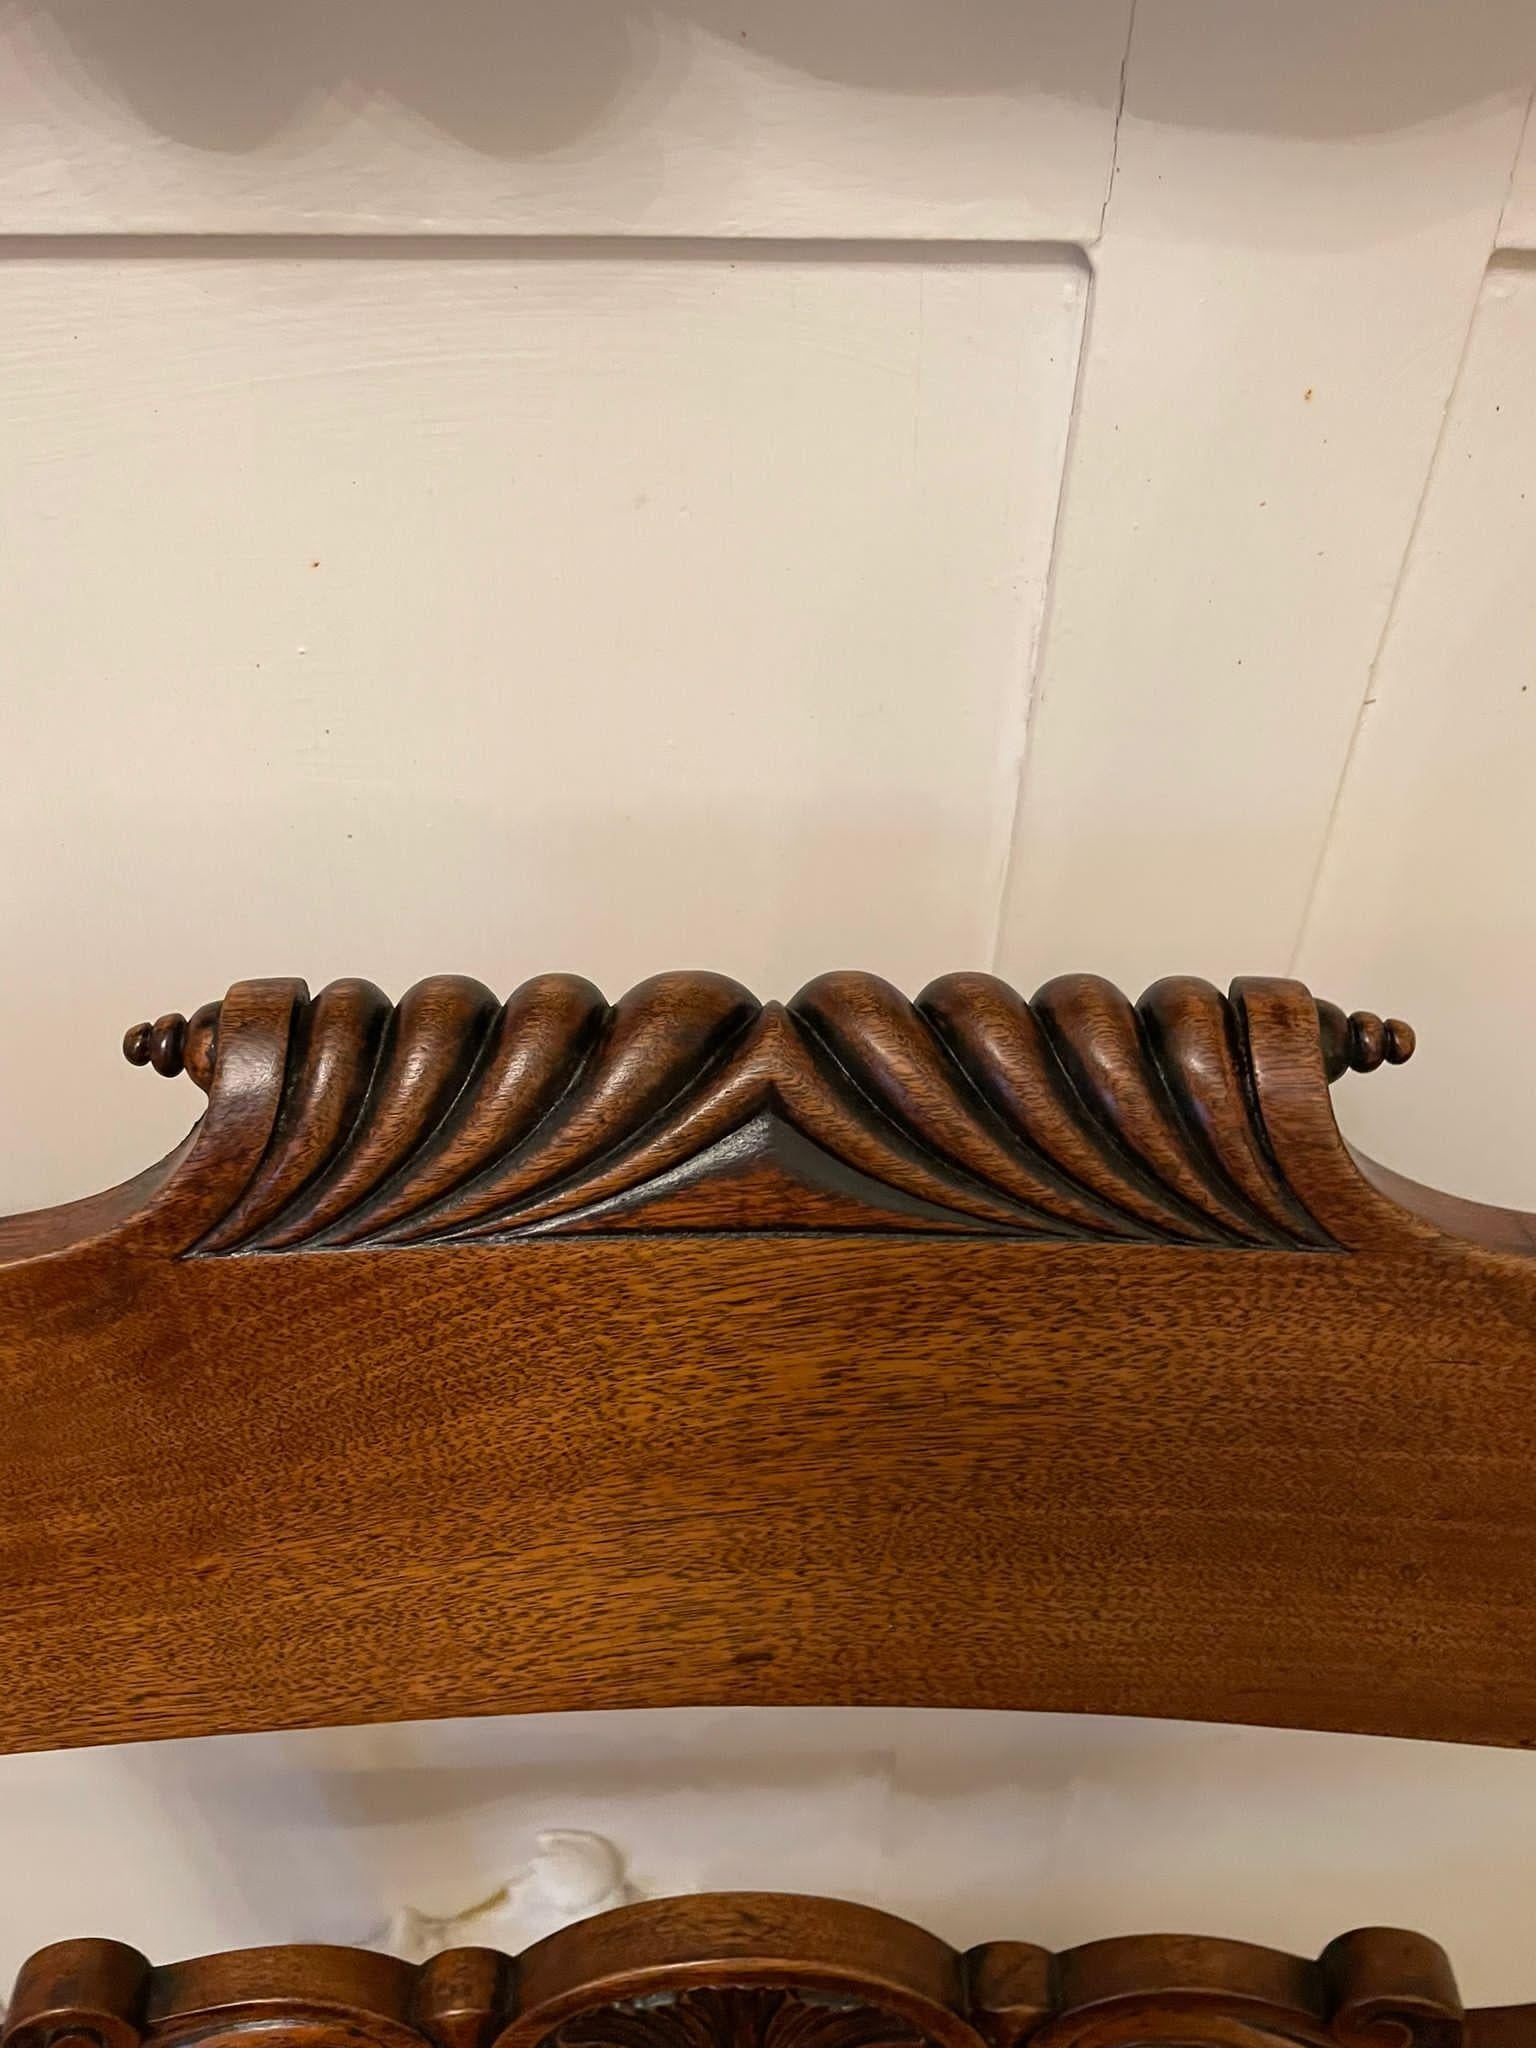 Other Antique Regency Quality Mahogany Desk Chair For Sale